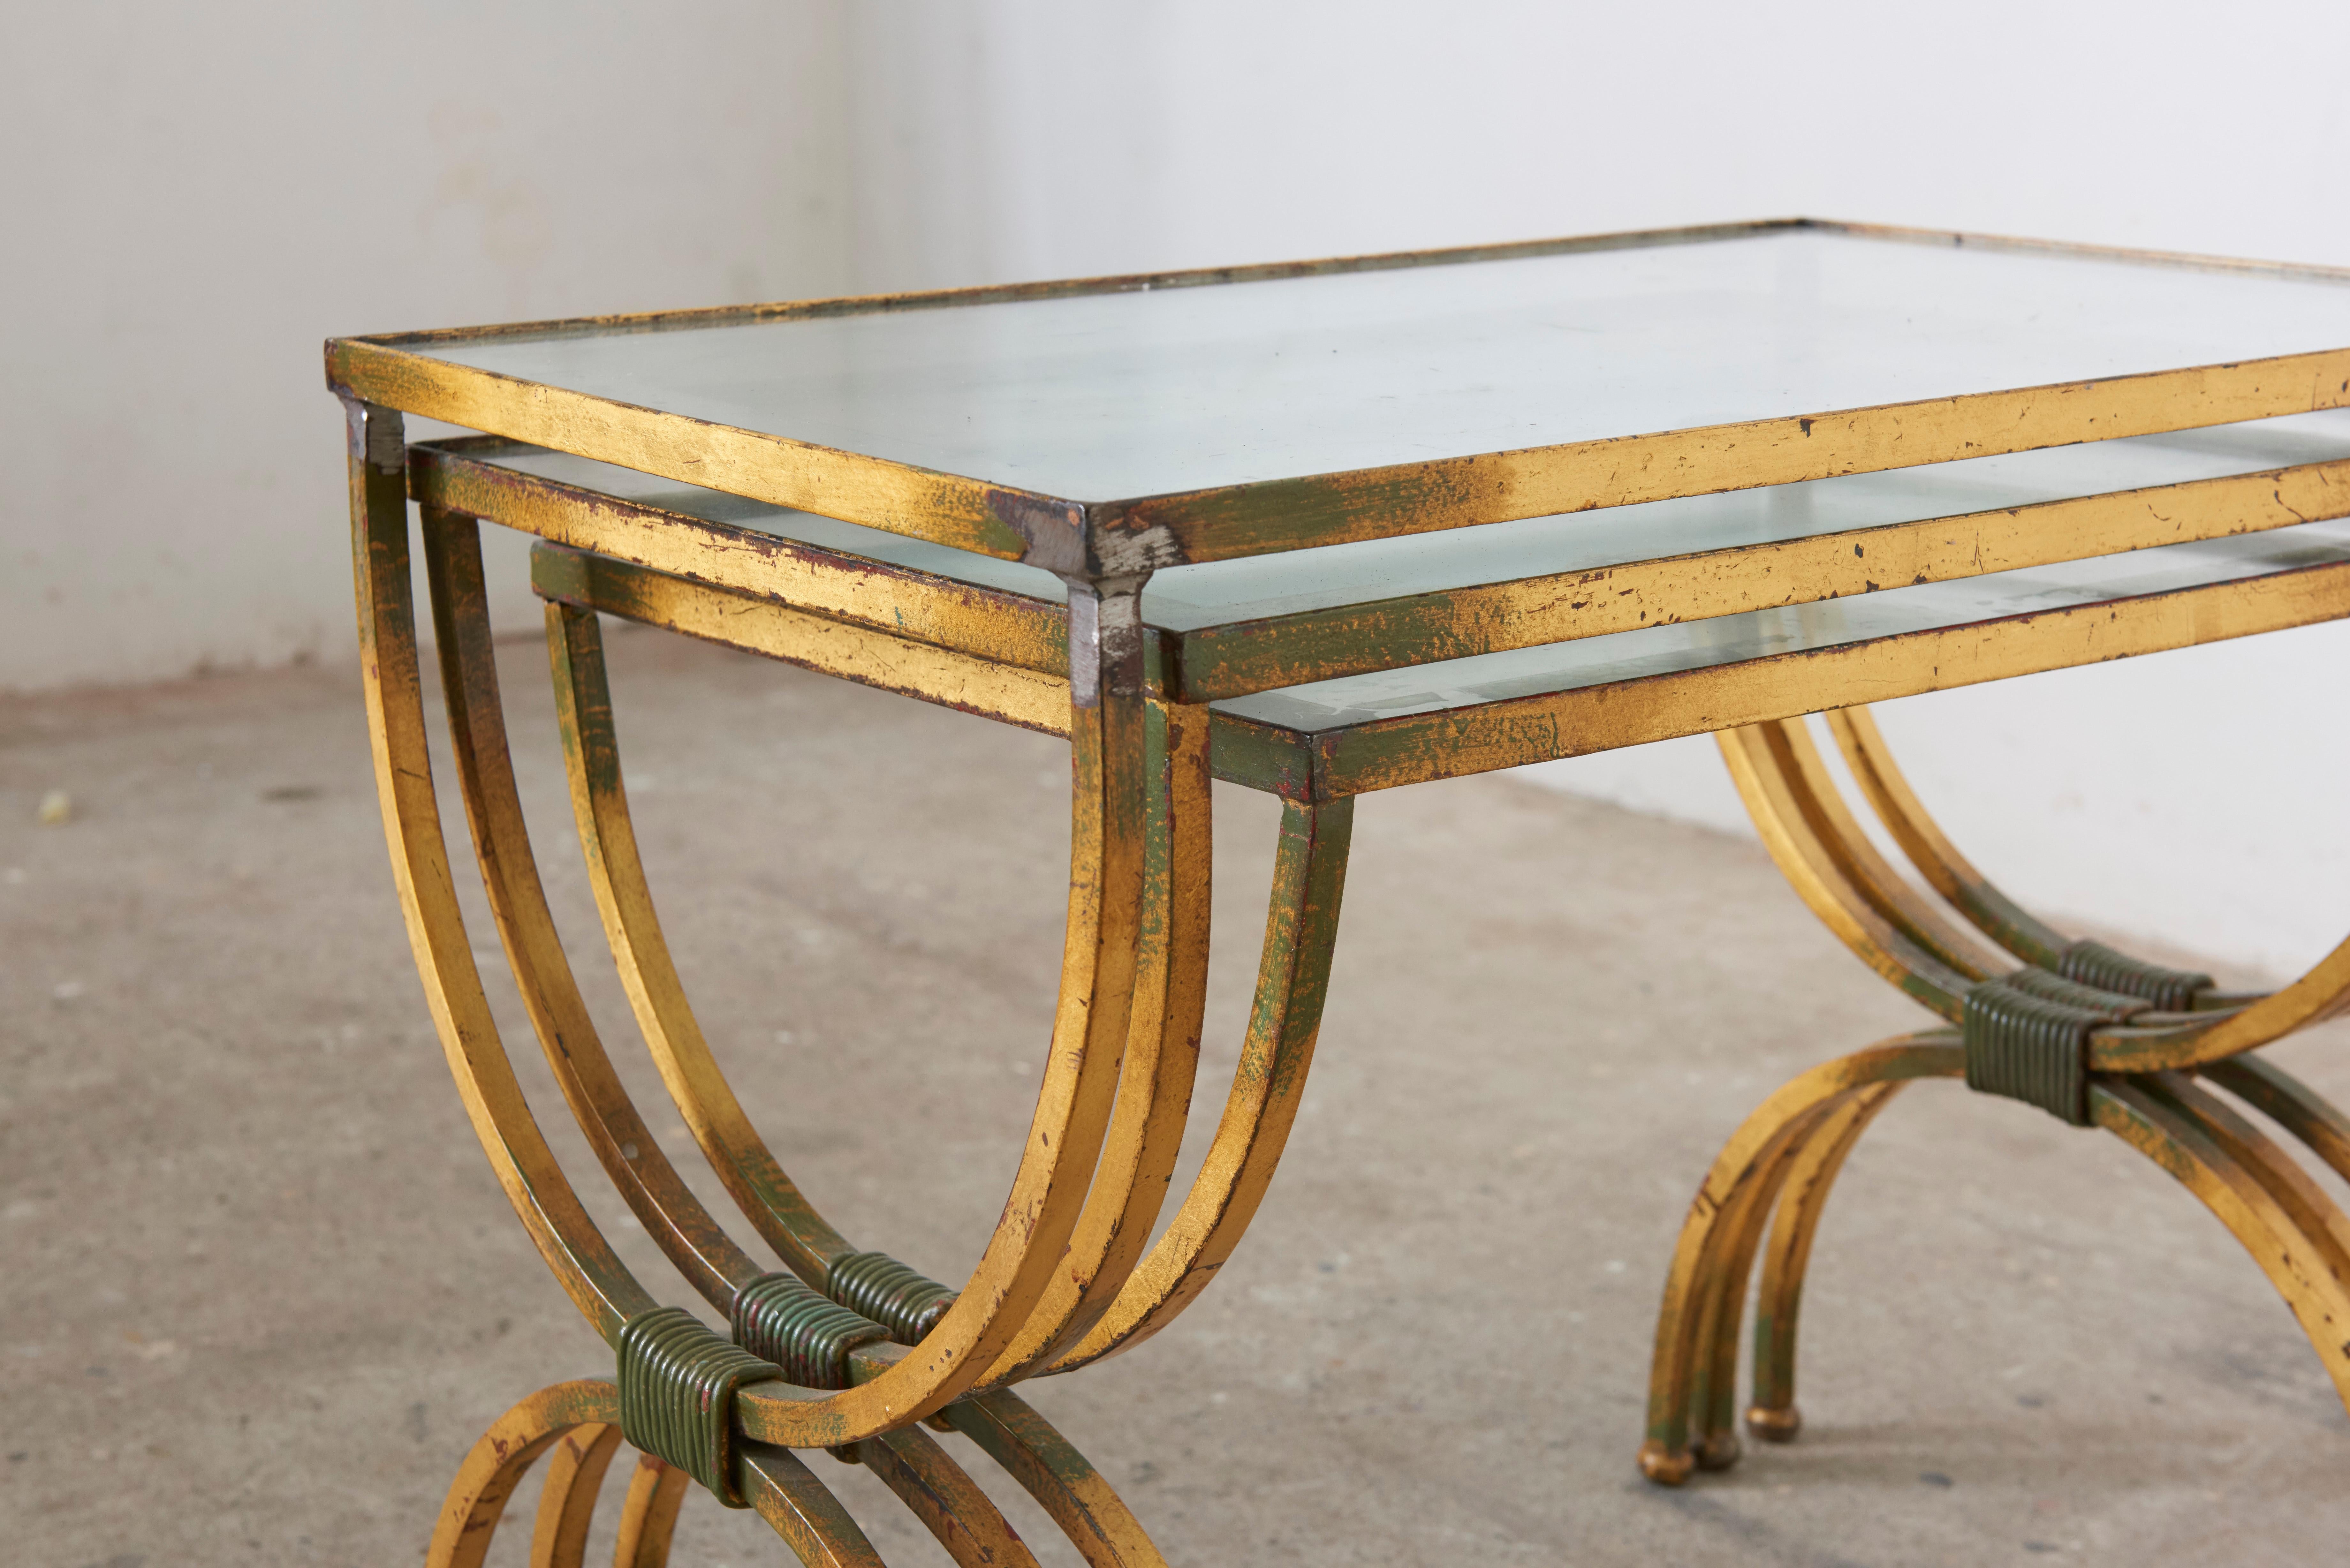 Set of tables in style of Jean Royere in the 1950s. The metal structure is hand gilt finished and has a gorgeous patina. 
The table tops are glass with a silver finish. All in good condition without any chips or cracks the silver with wear